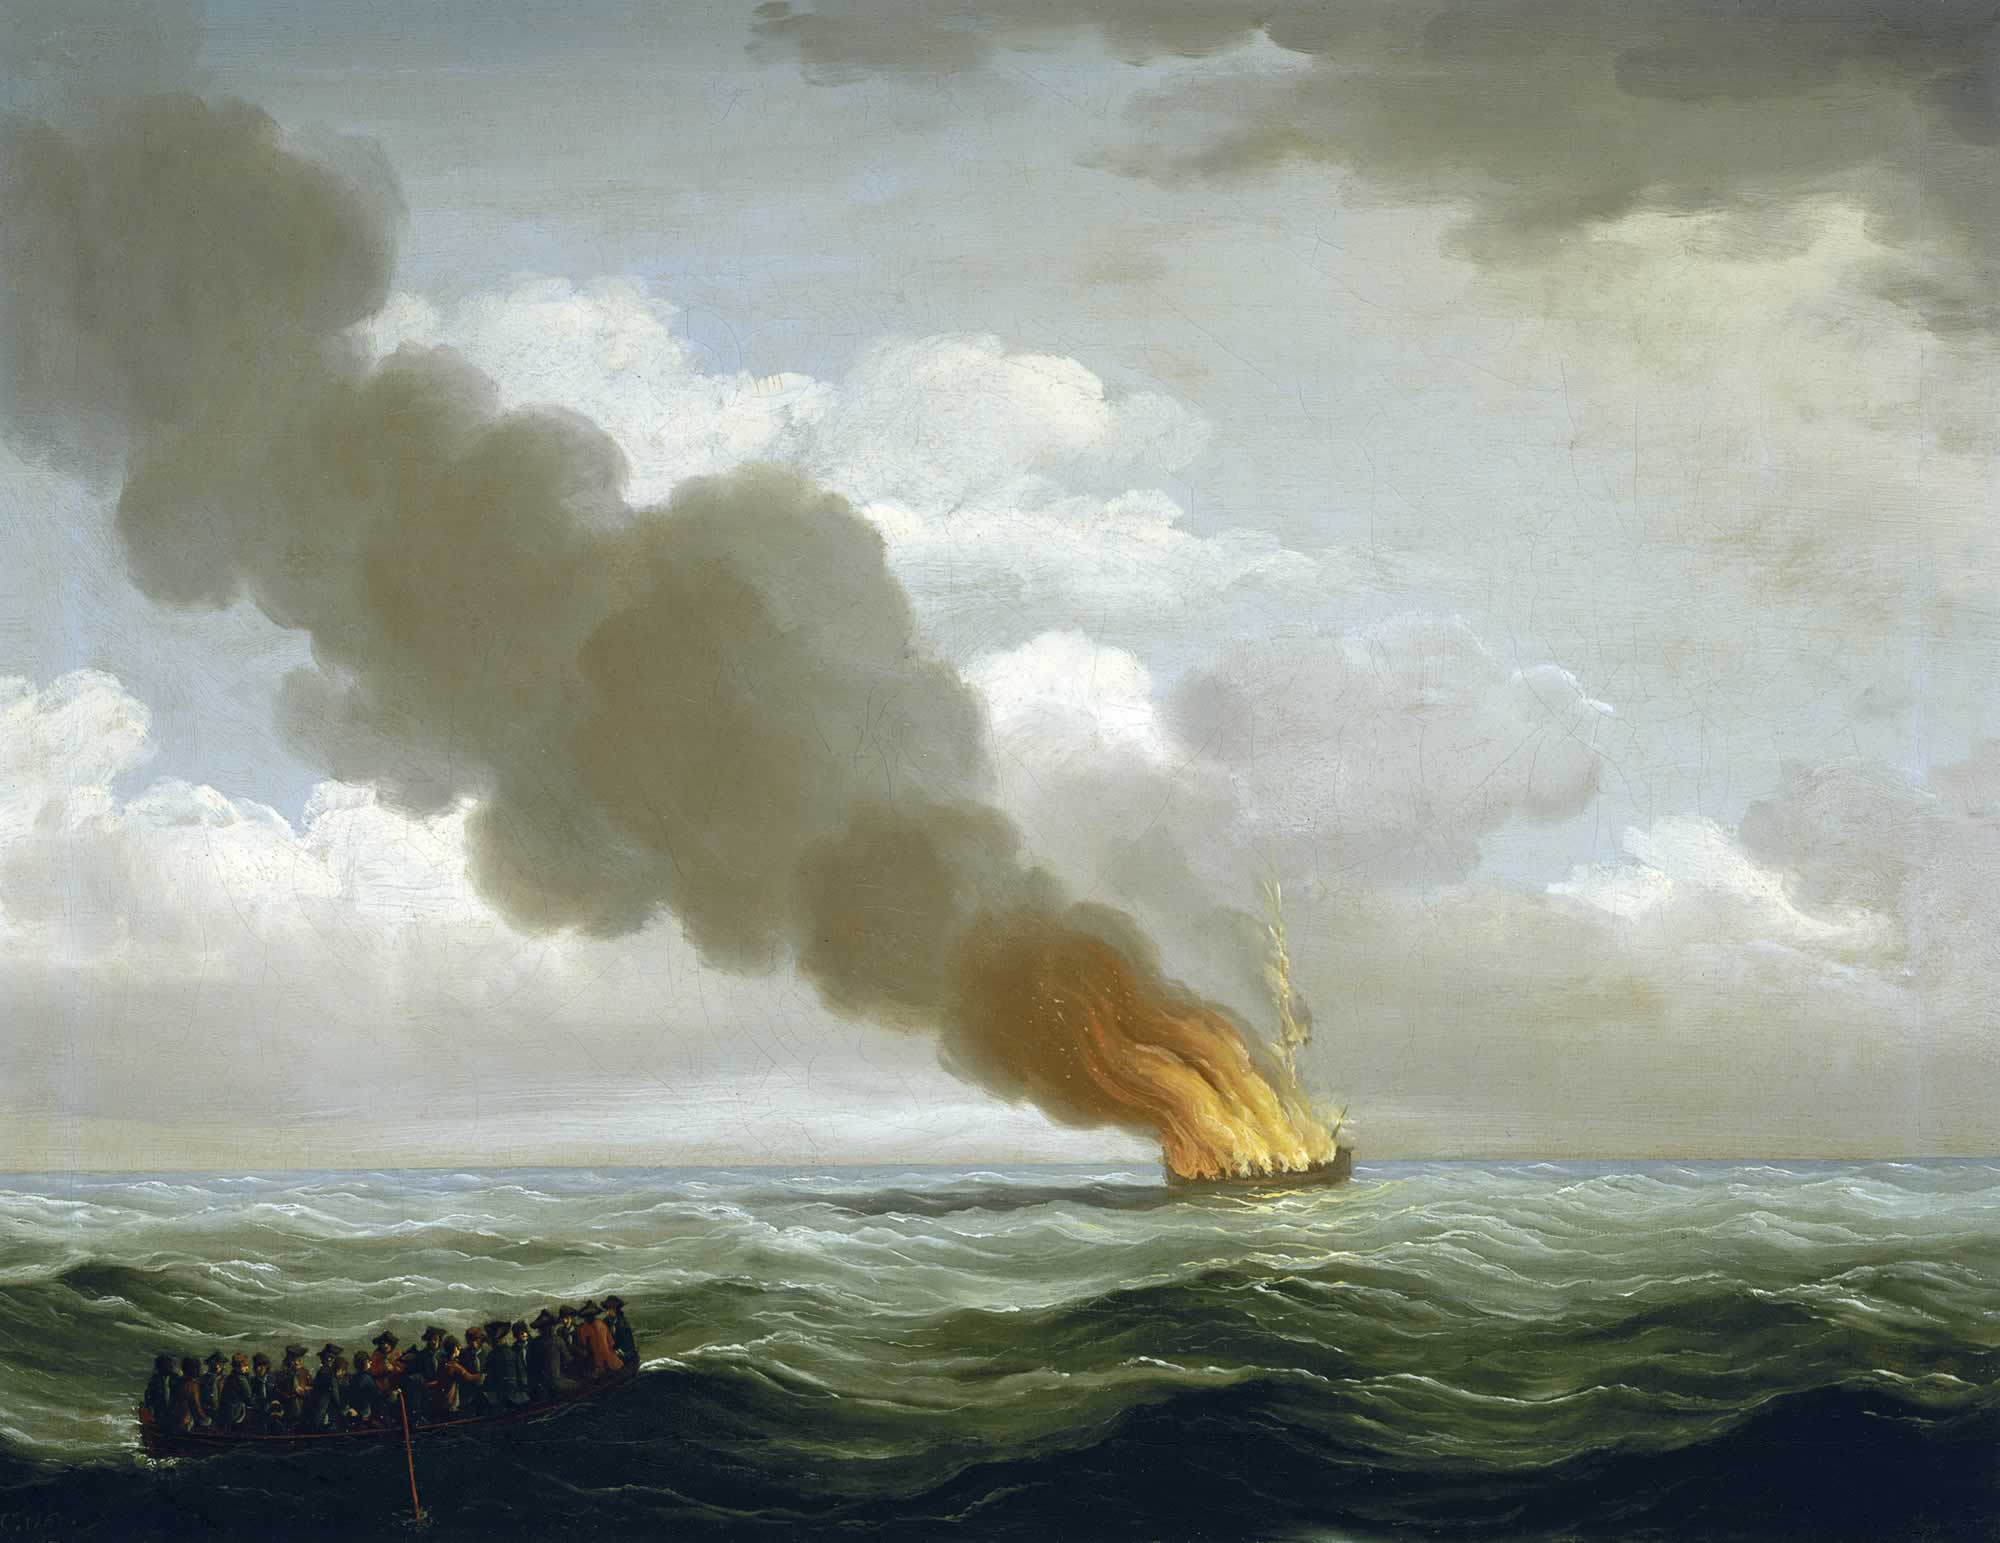 Luxborough galley burnt nearly to the water, 25 June 1727